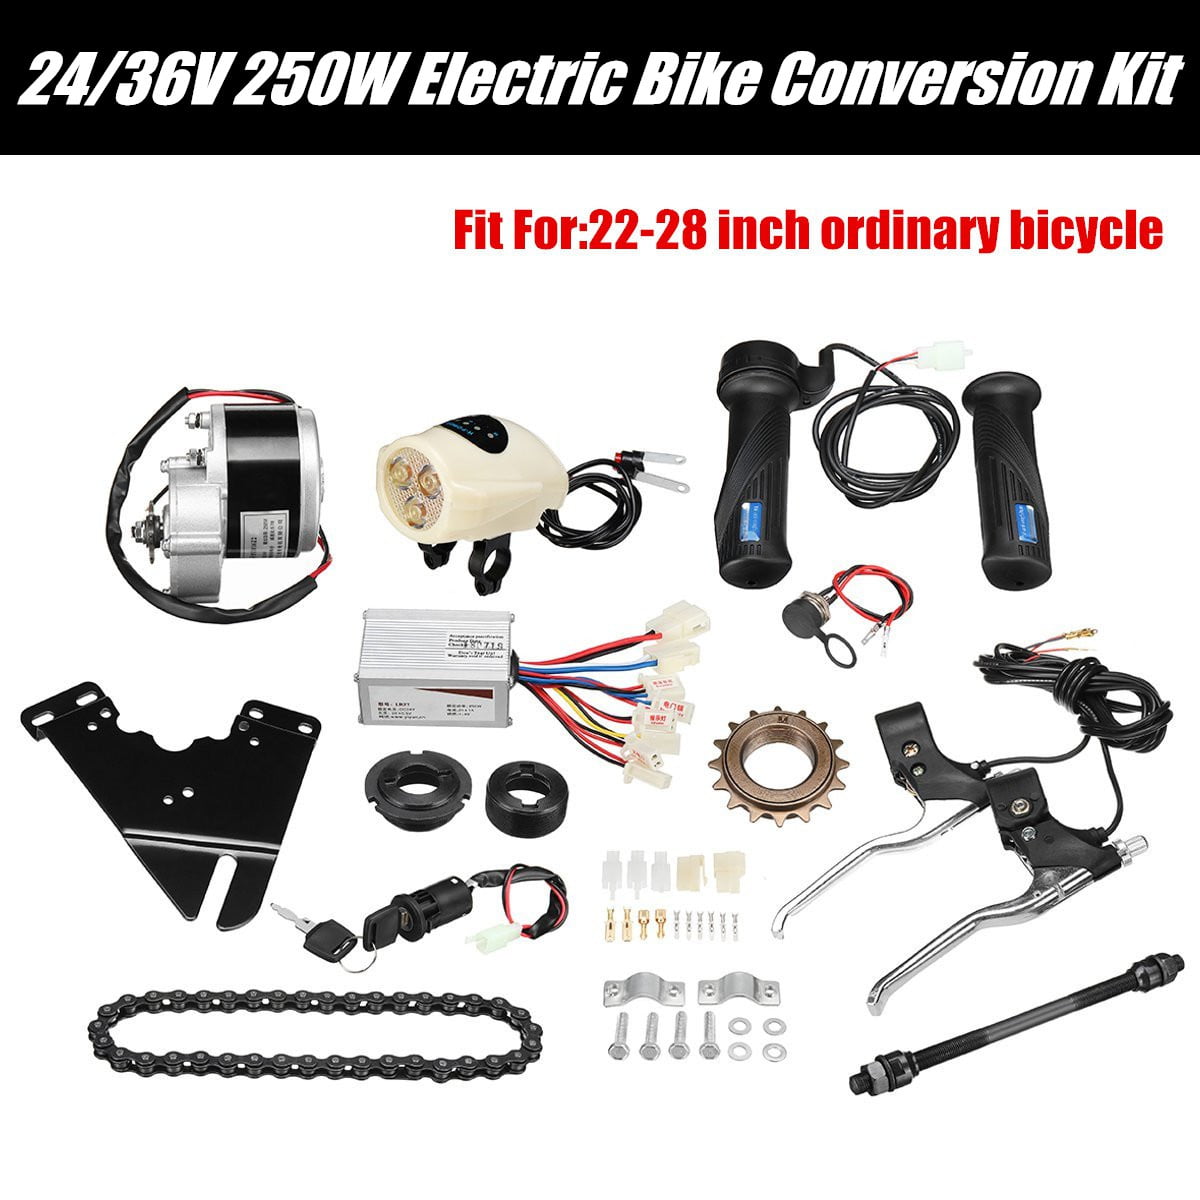 350W 24V Electric Bicycle E-bike Conversion Kit For 22''-28'' Ordinary Bicycle 